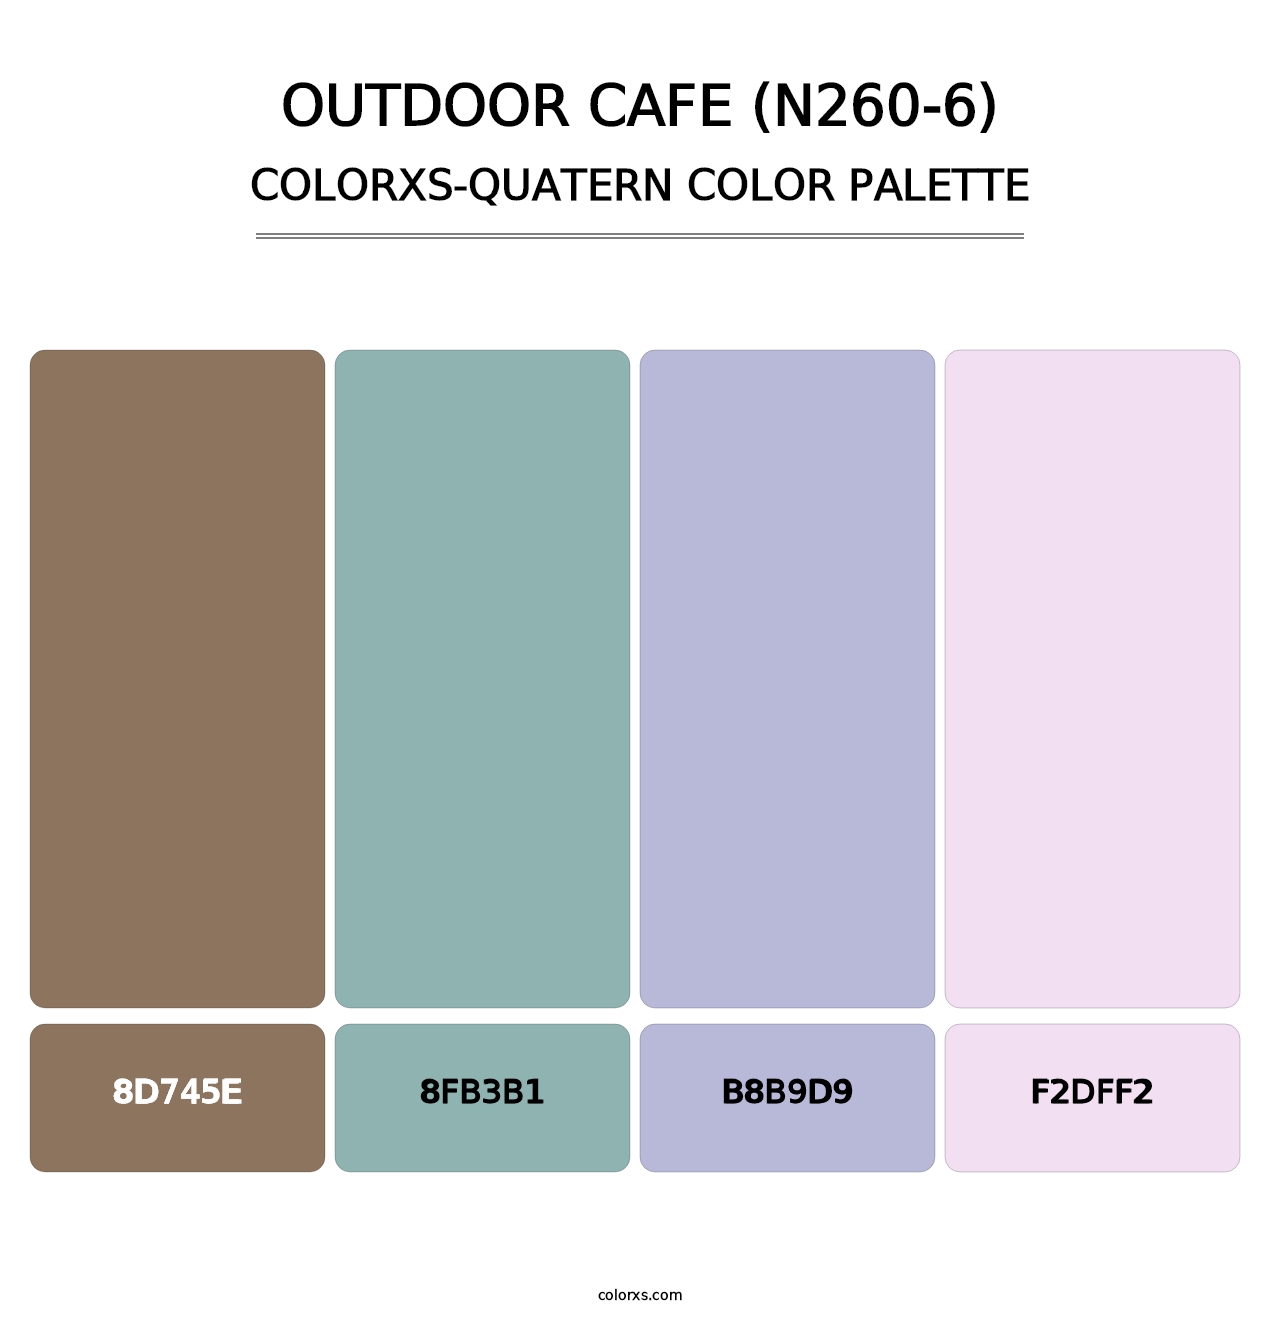 Outdoor Cafe (N260-6) - Colorxs Quatern Palette